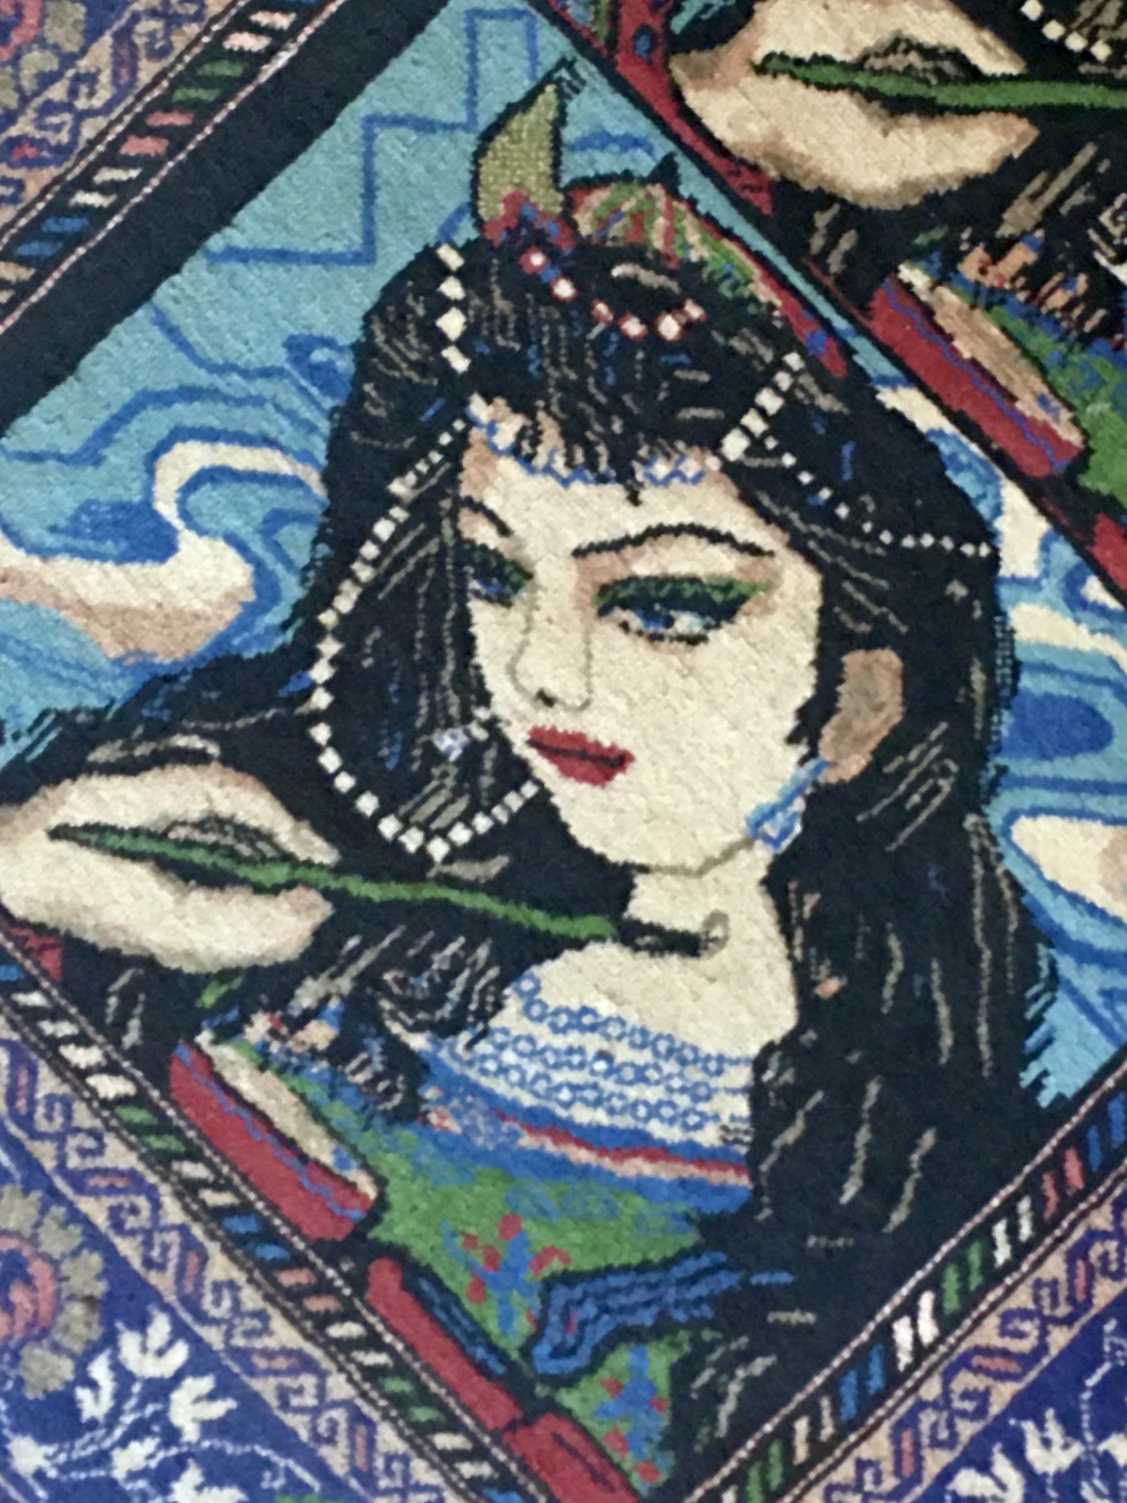 A close-up of one of the Shirin portraits